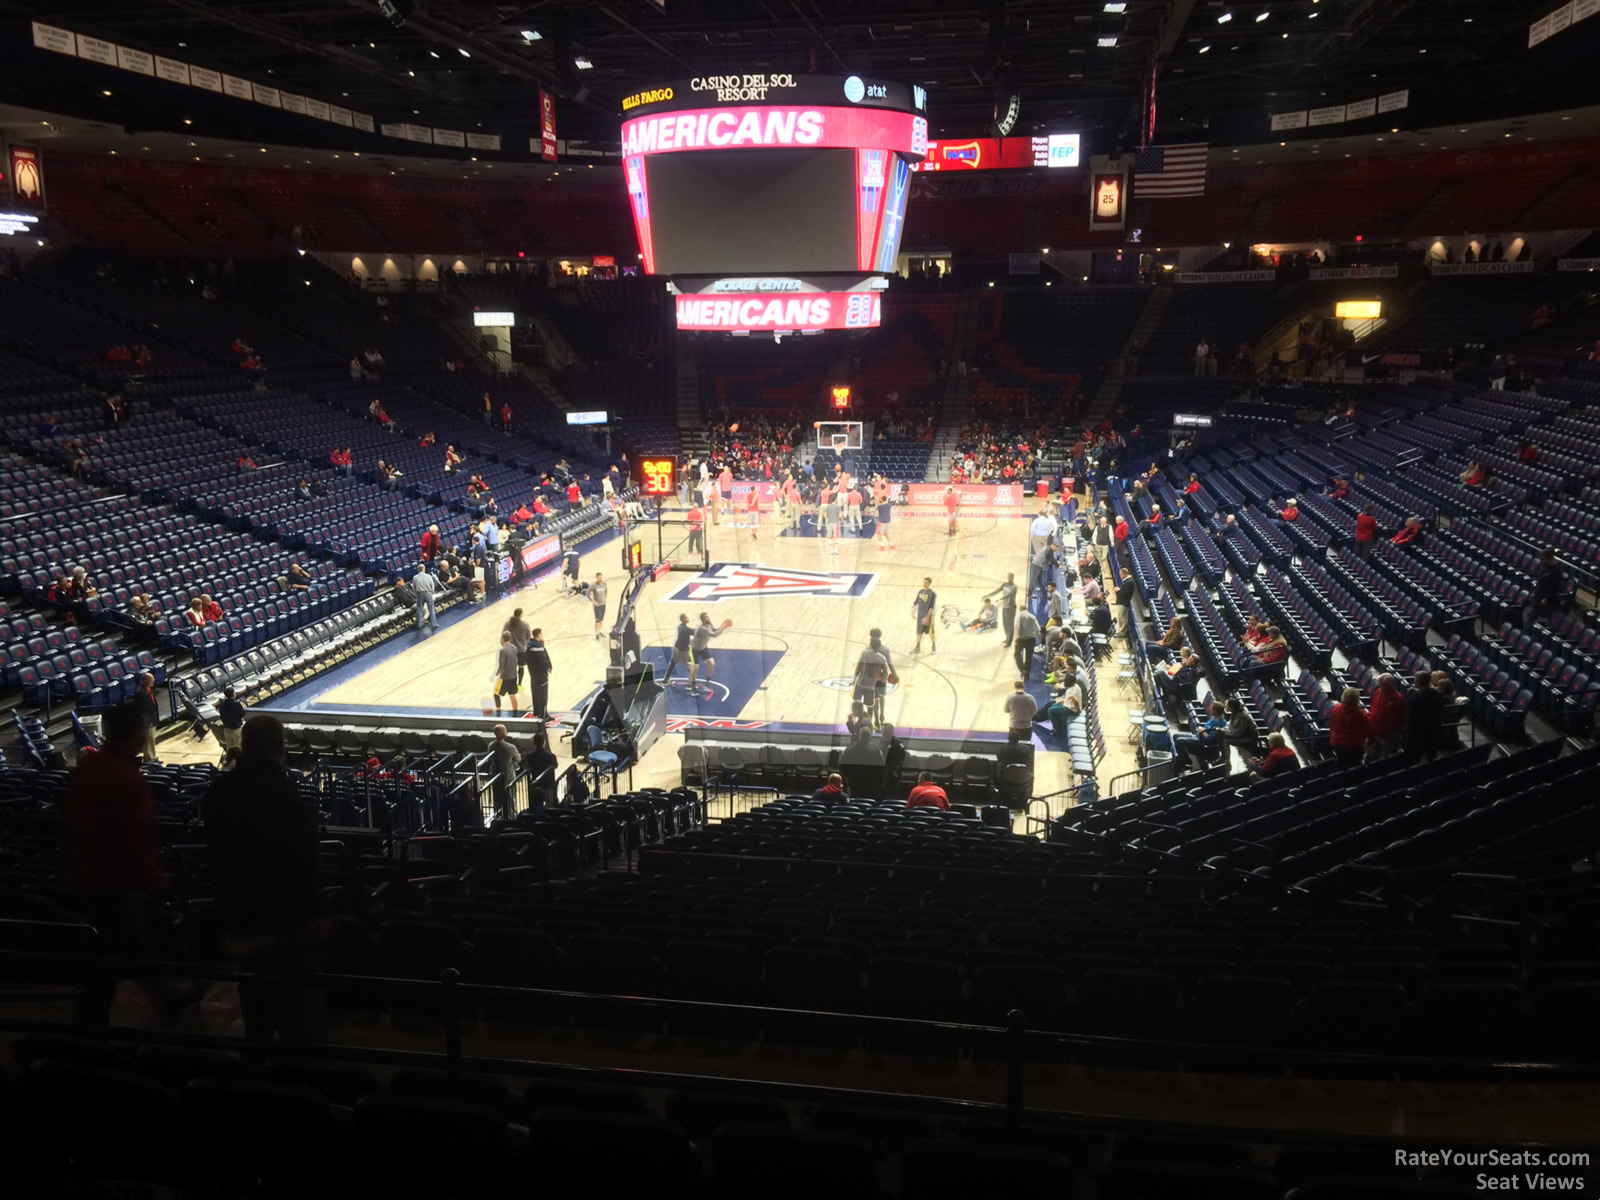 section 8, row 23 seat view  - mckale center